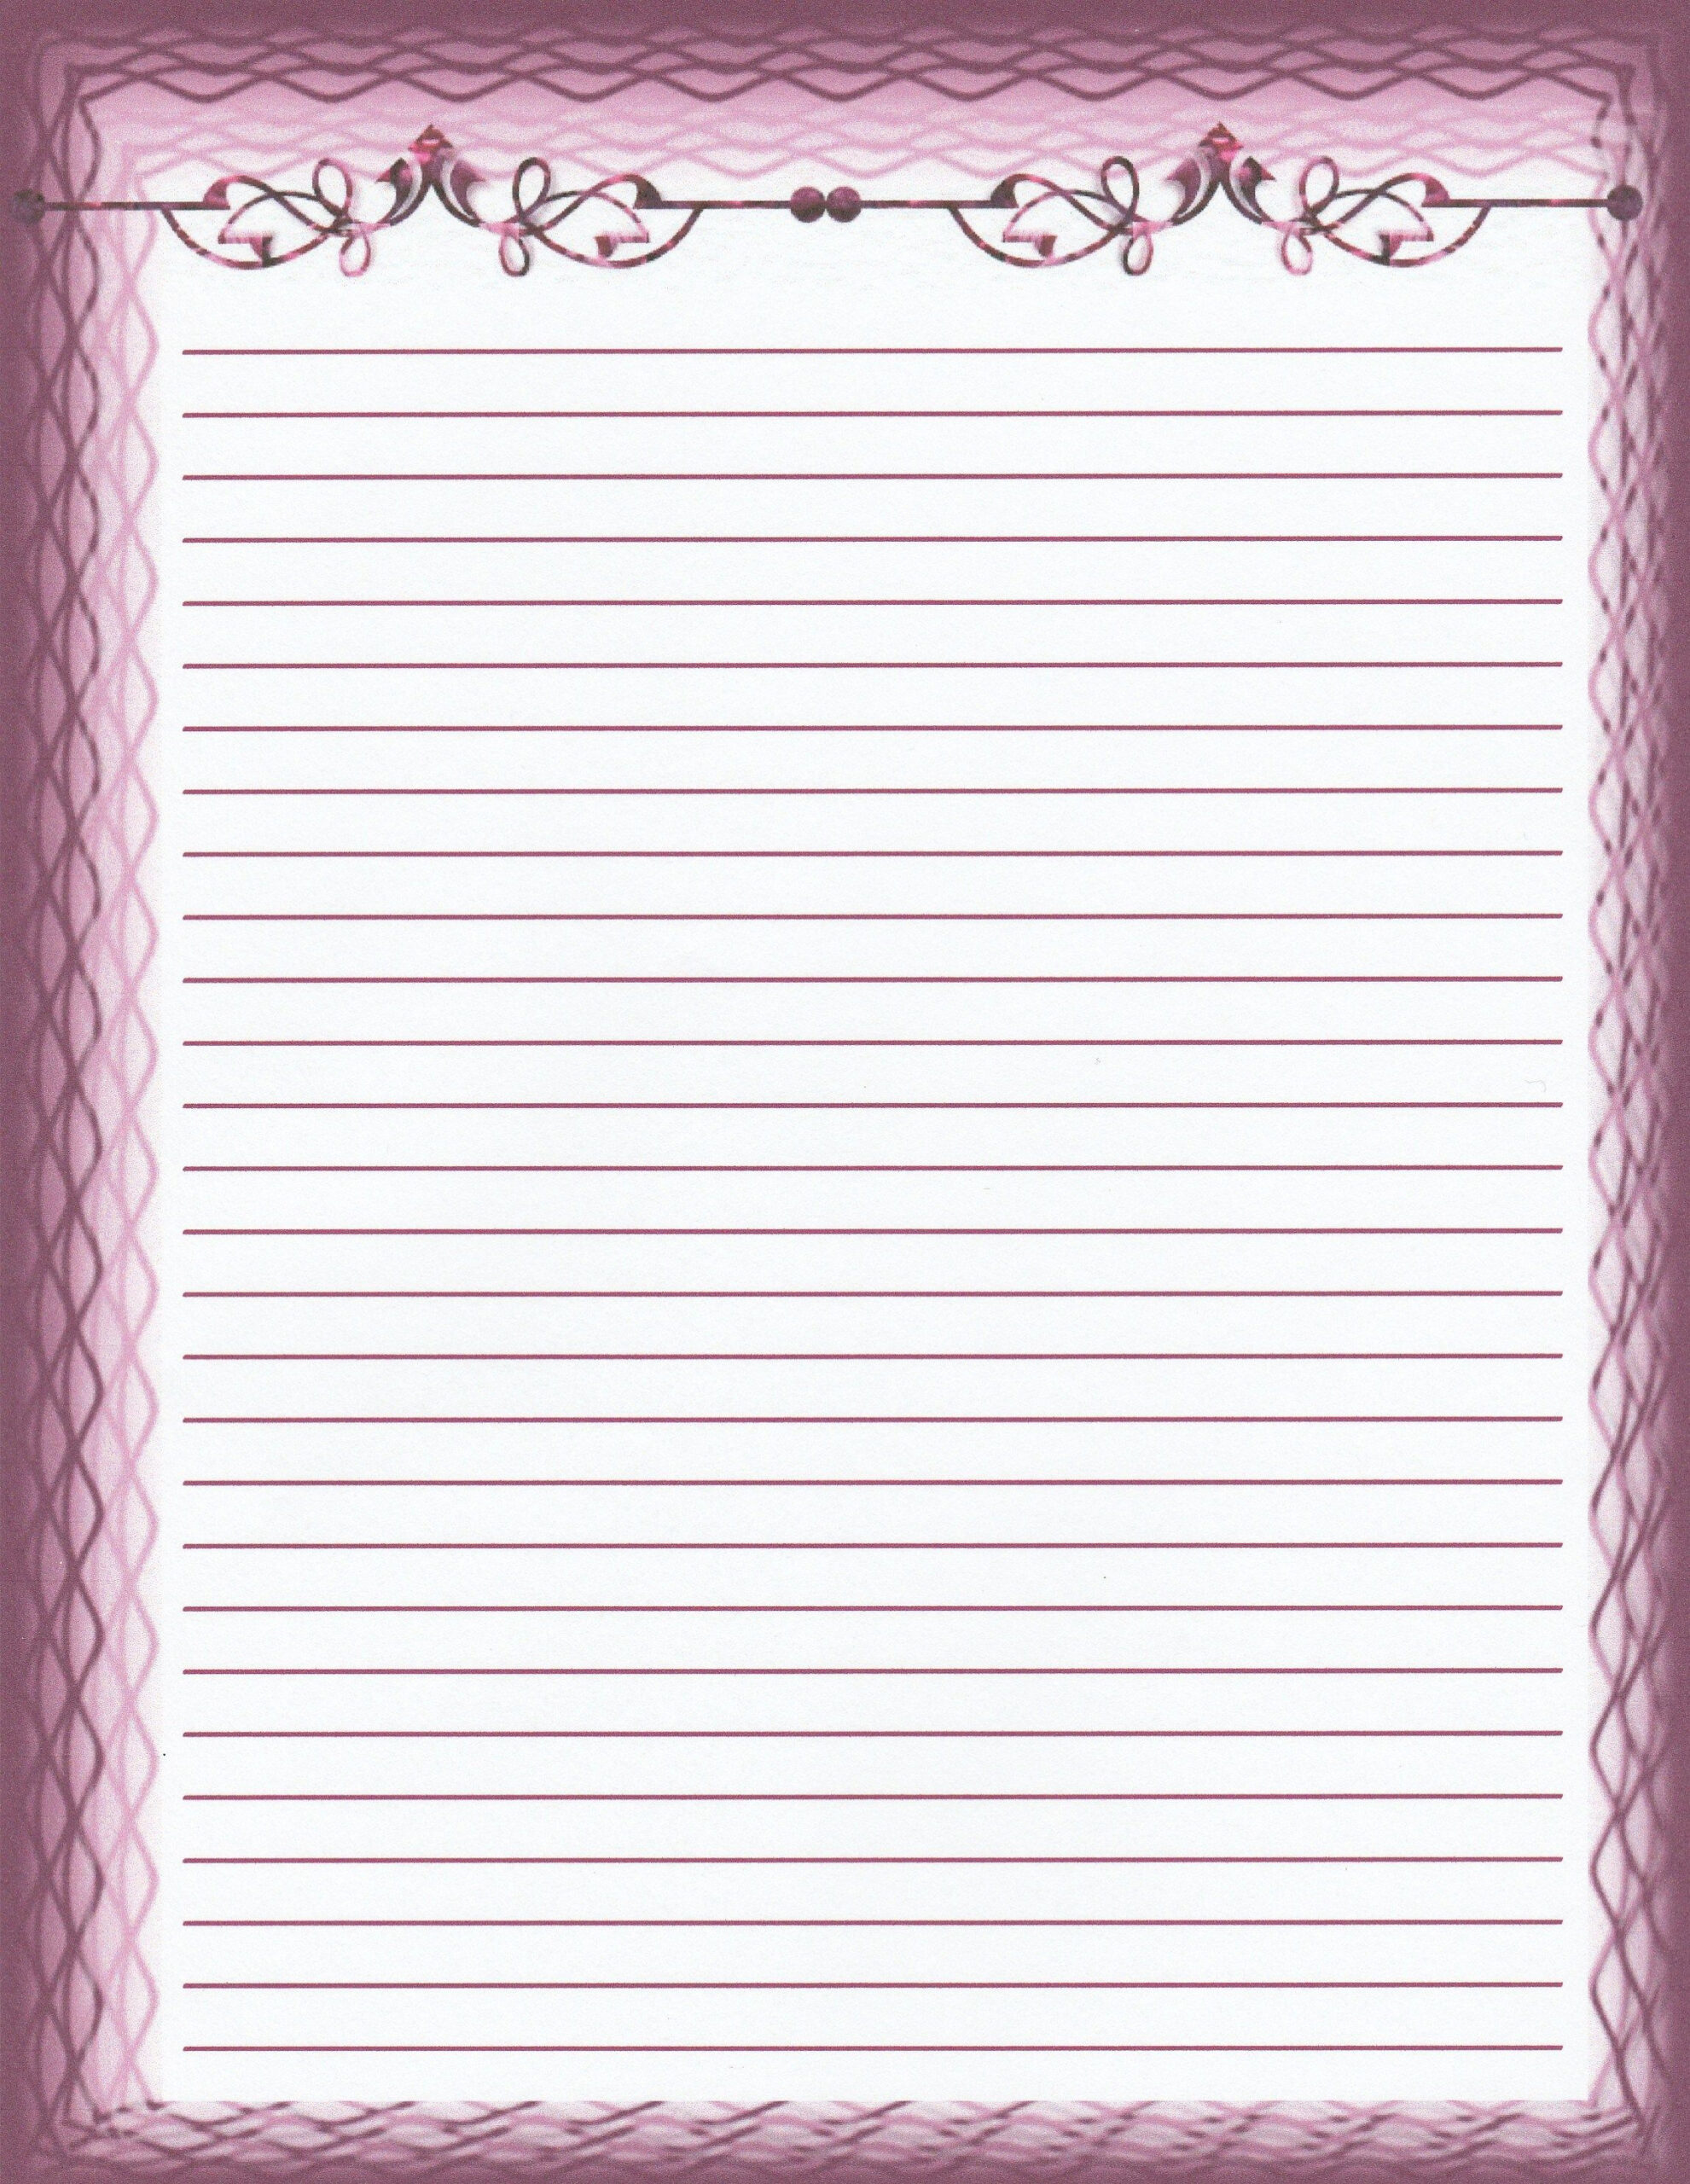 Lined Stationery Paper Printable Free